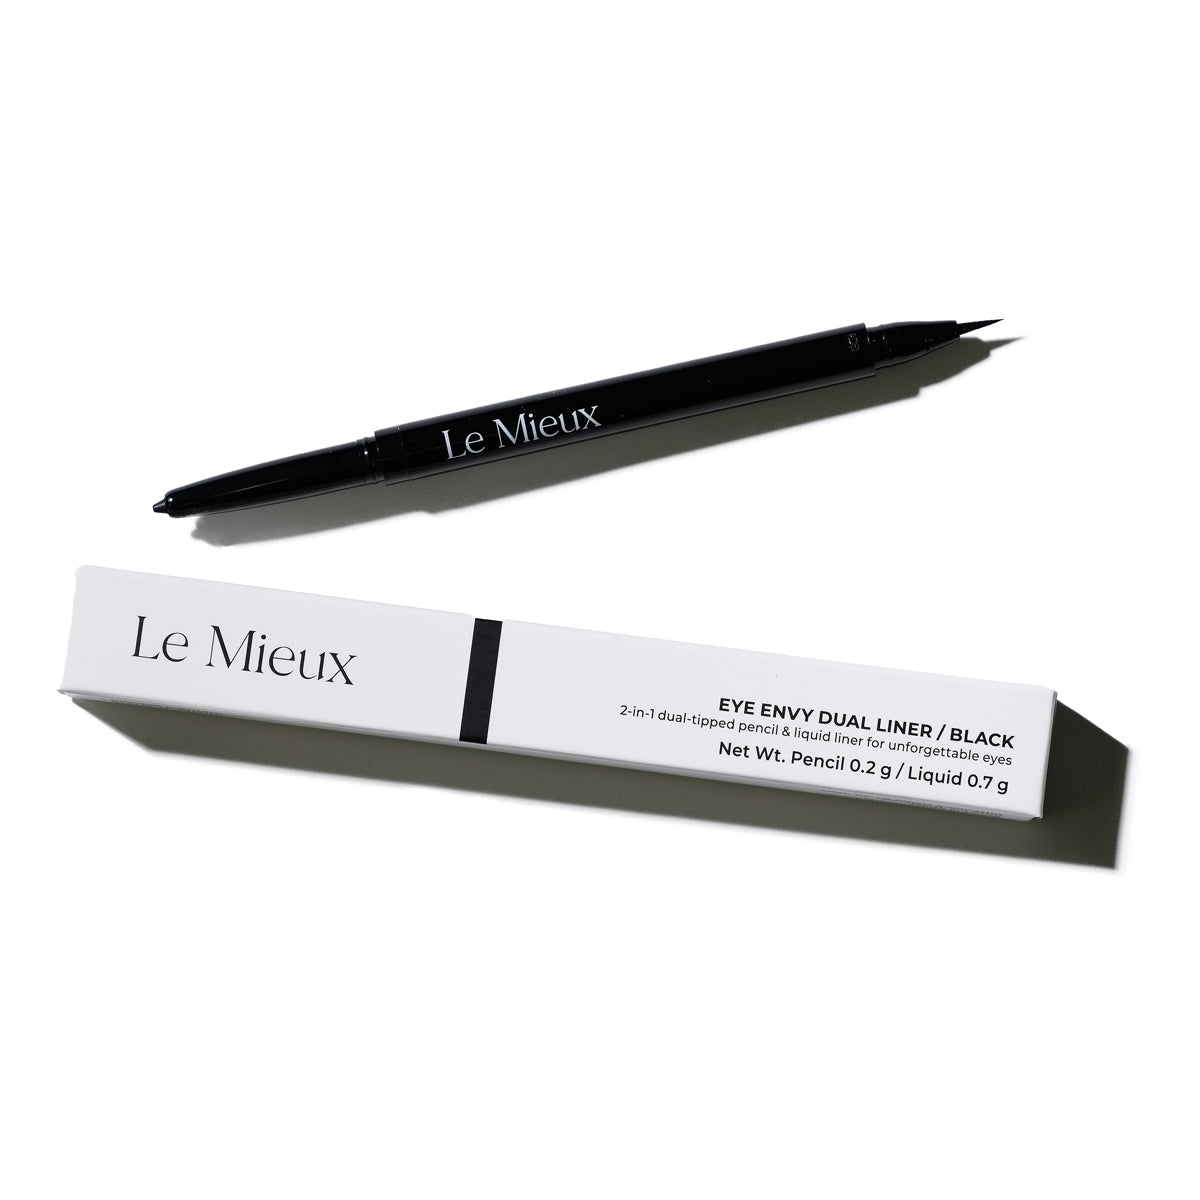  Eye Envy Dual Liner from Le Mieux Skincare - 1